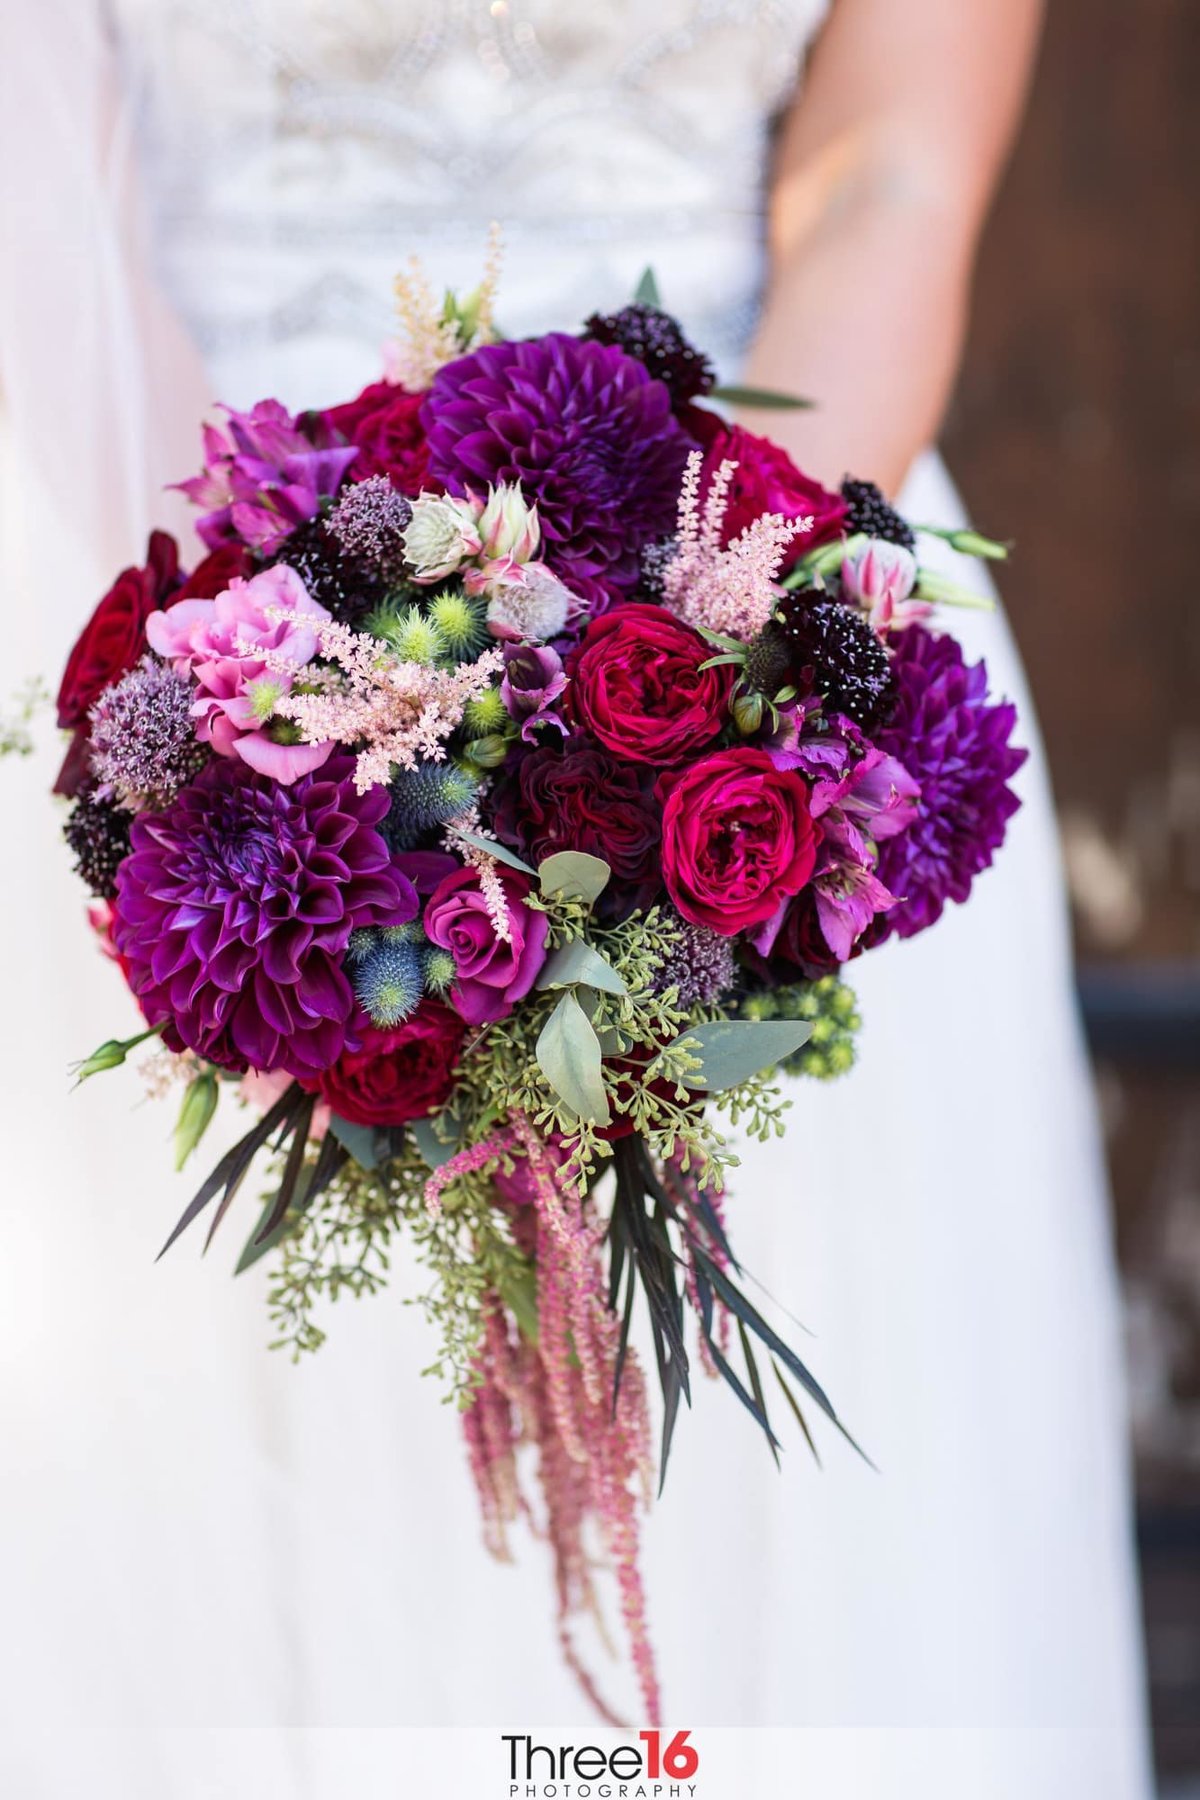 Beautiful Bridal Bouquet of Flowers